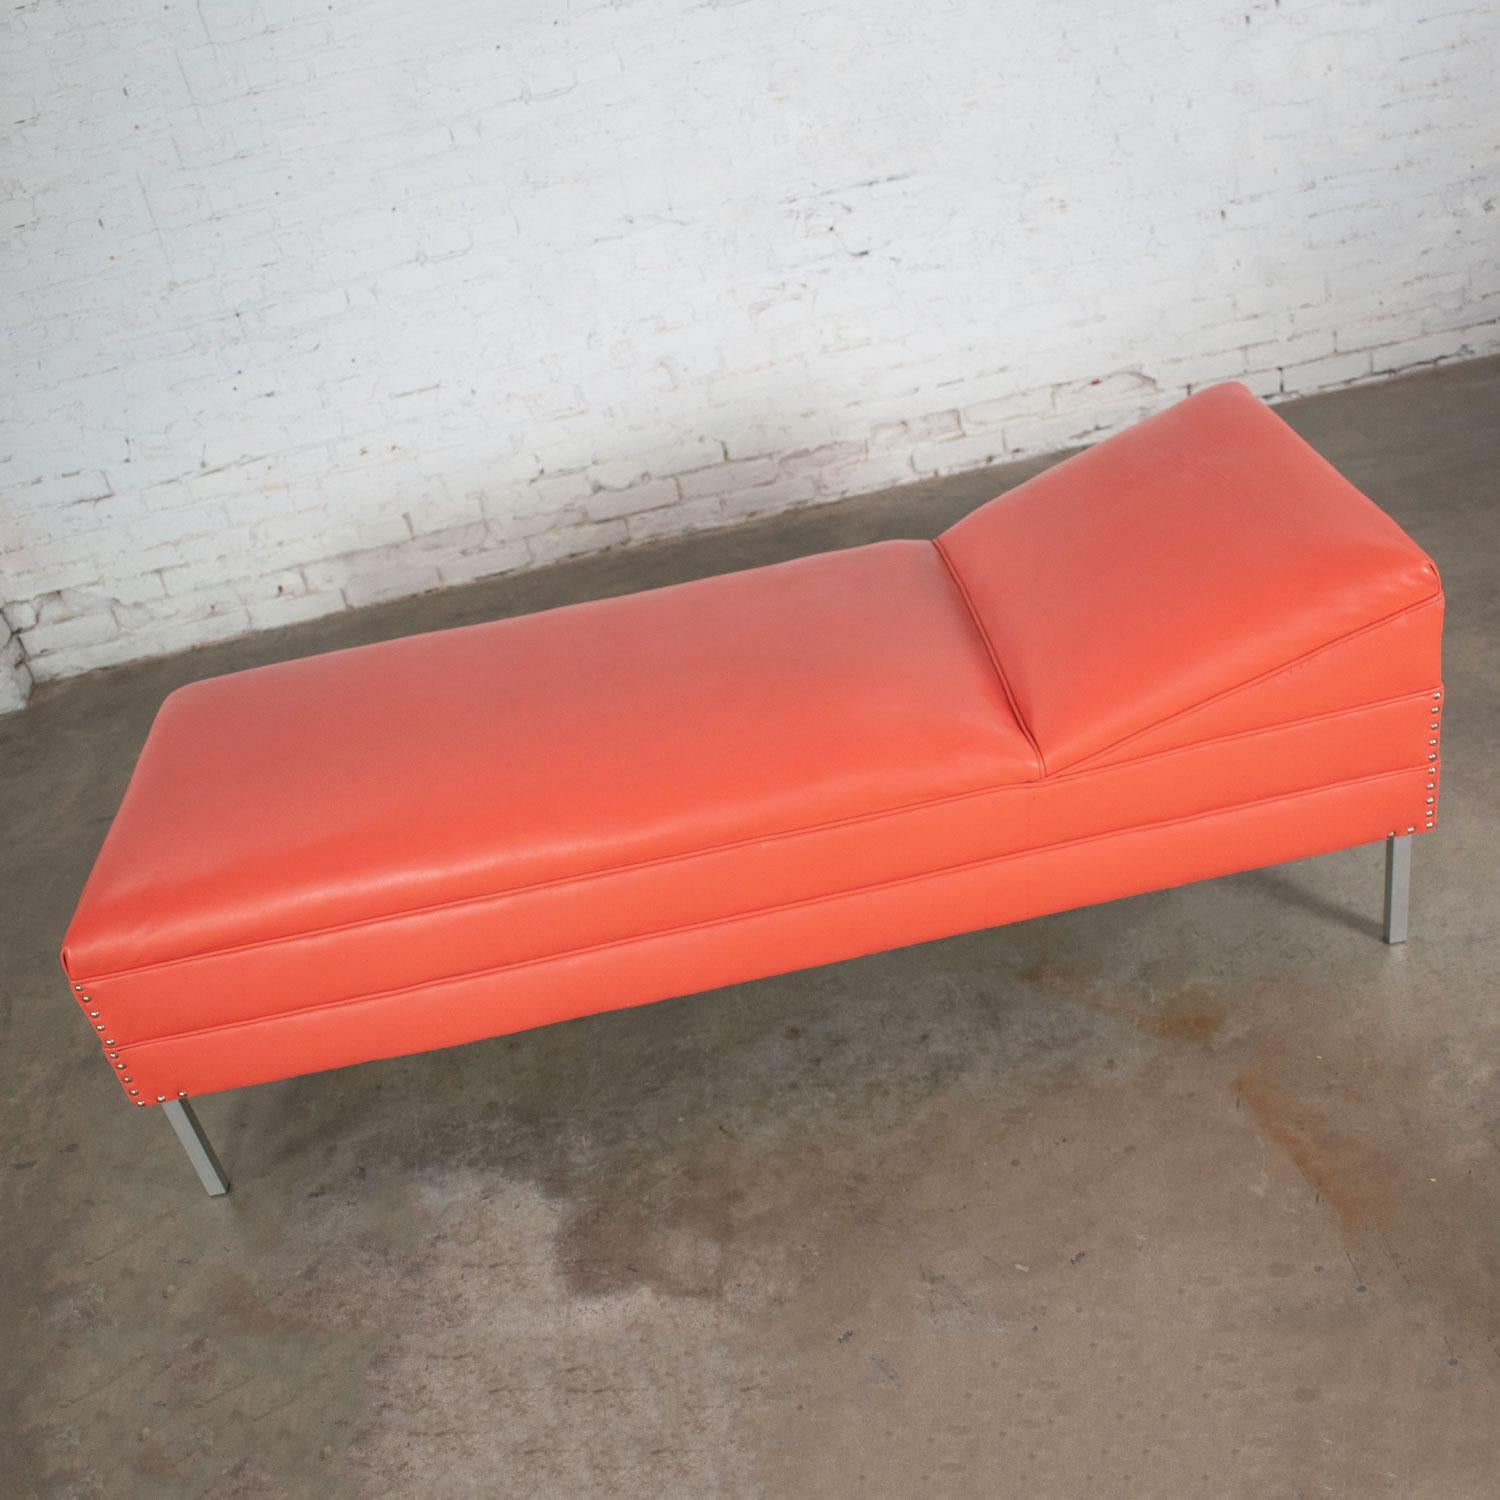 Mid-Century Modern Chaise or Day Bed in Coral Vinyl Faux Leather Aluminum Legs For Sale 1